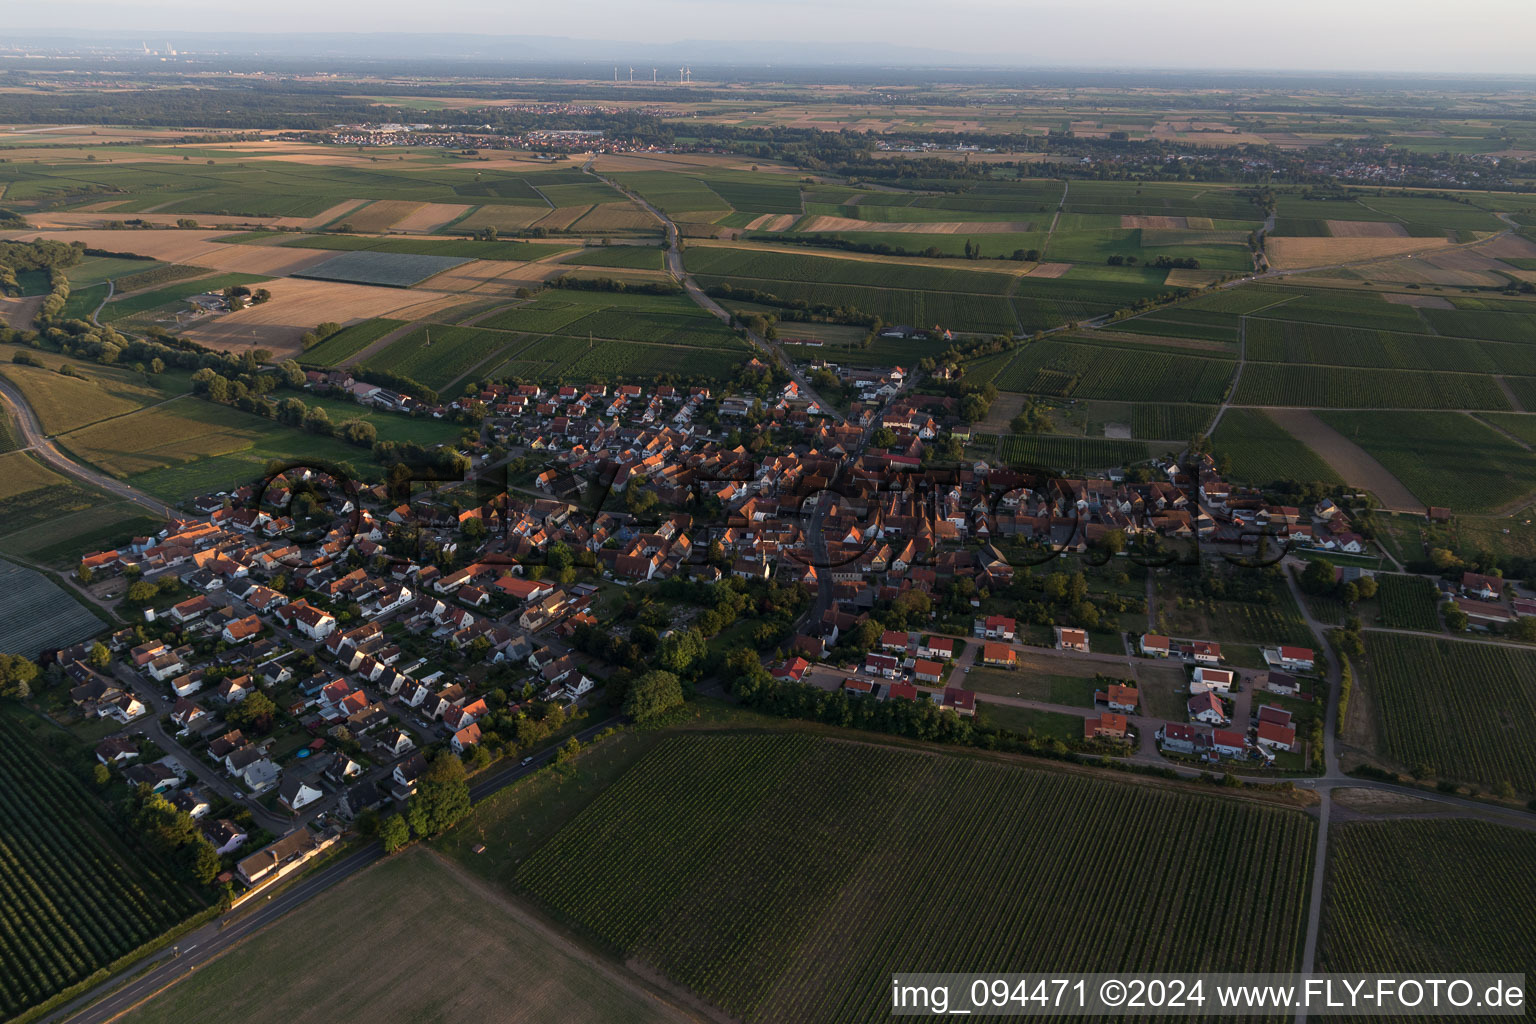 Aerial view of Village - view on the edge of agricultural fields and farmland in Impflingen in the state Rhineland-Palatinate, Germany